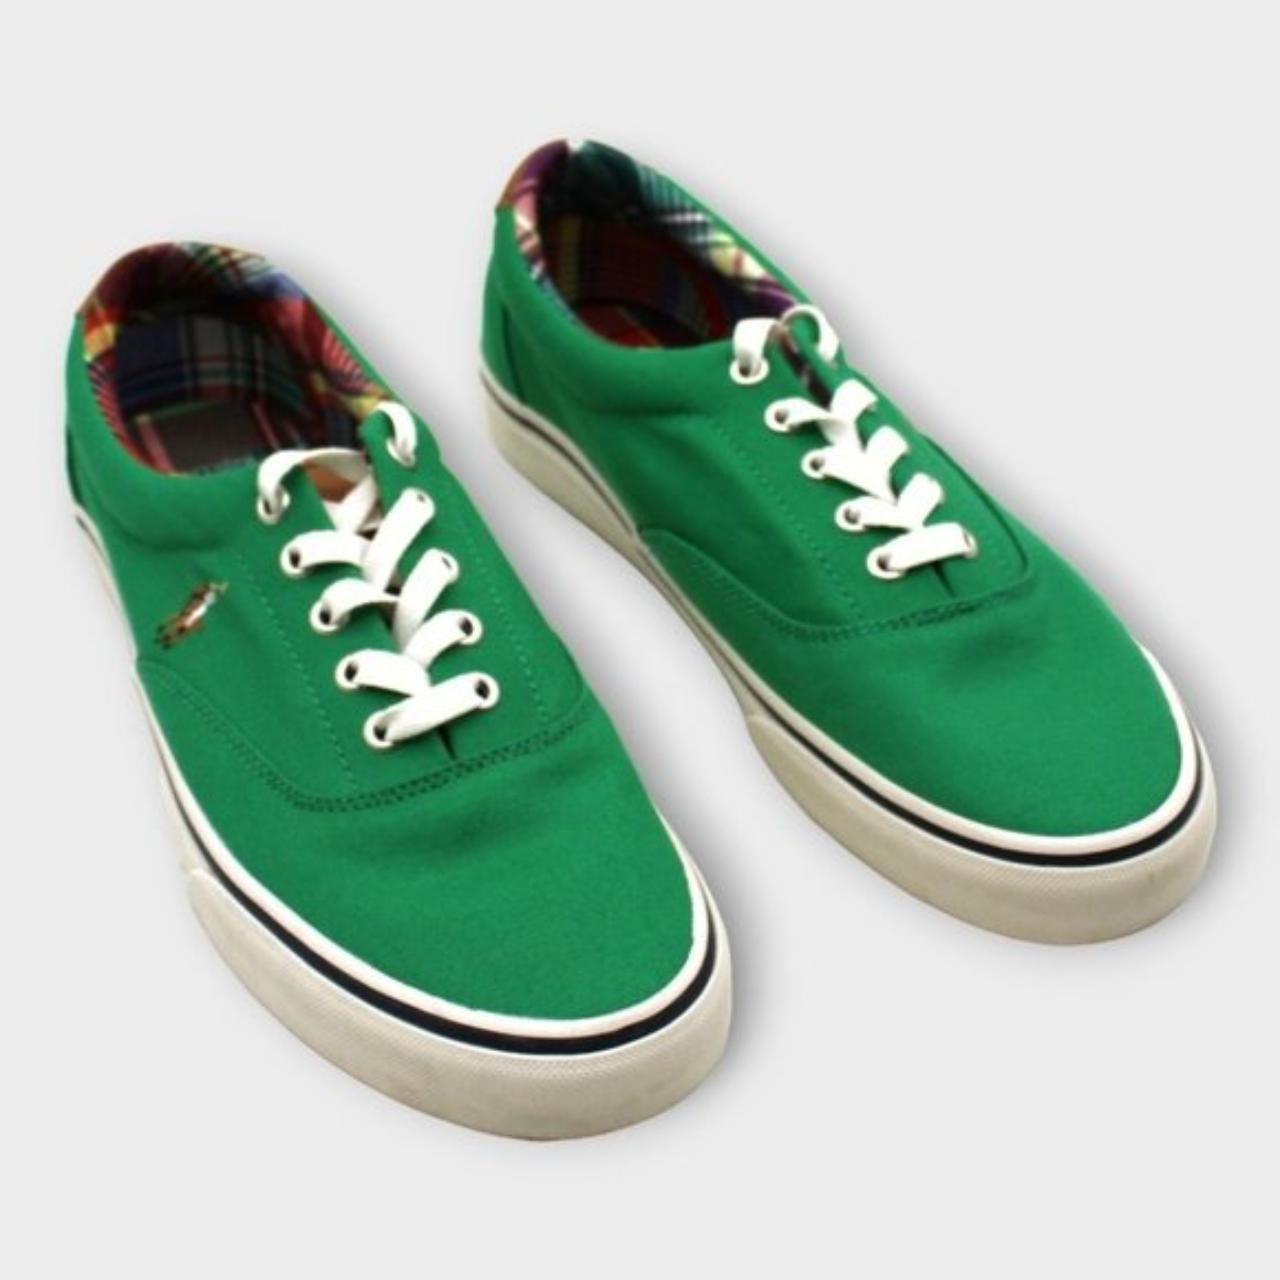 Buy U.S. Polo Assn. Men Canvas Lace Up Brentt 2.0 Sneakers - NNNOW.com